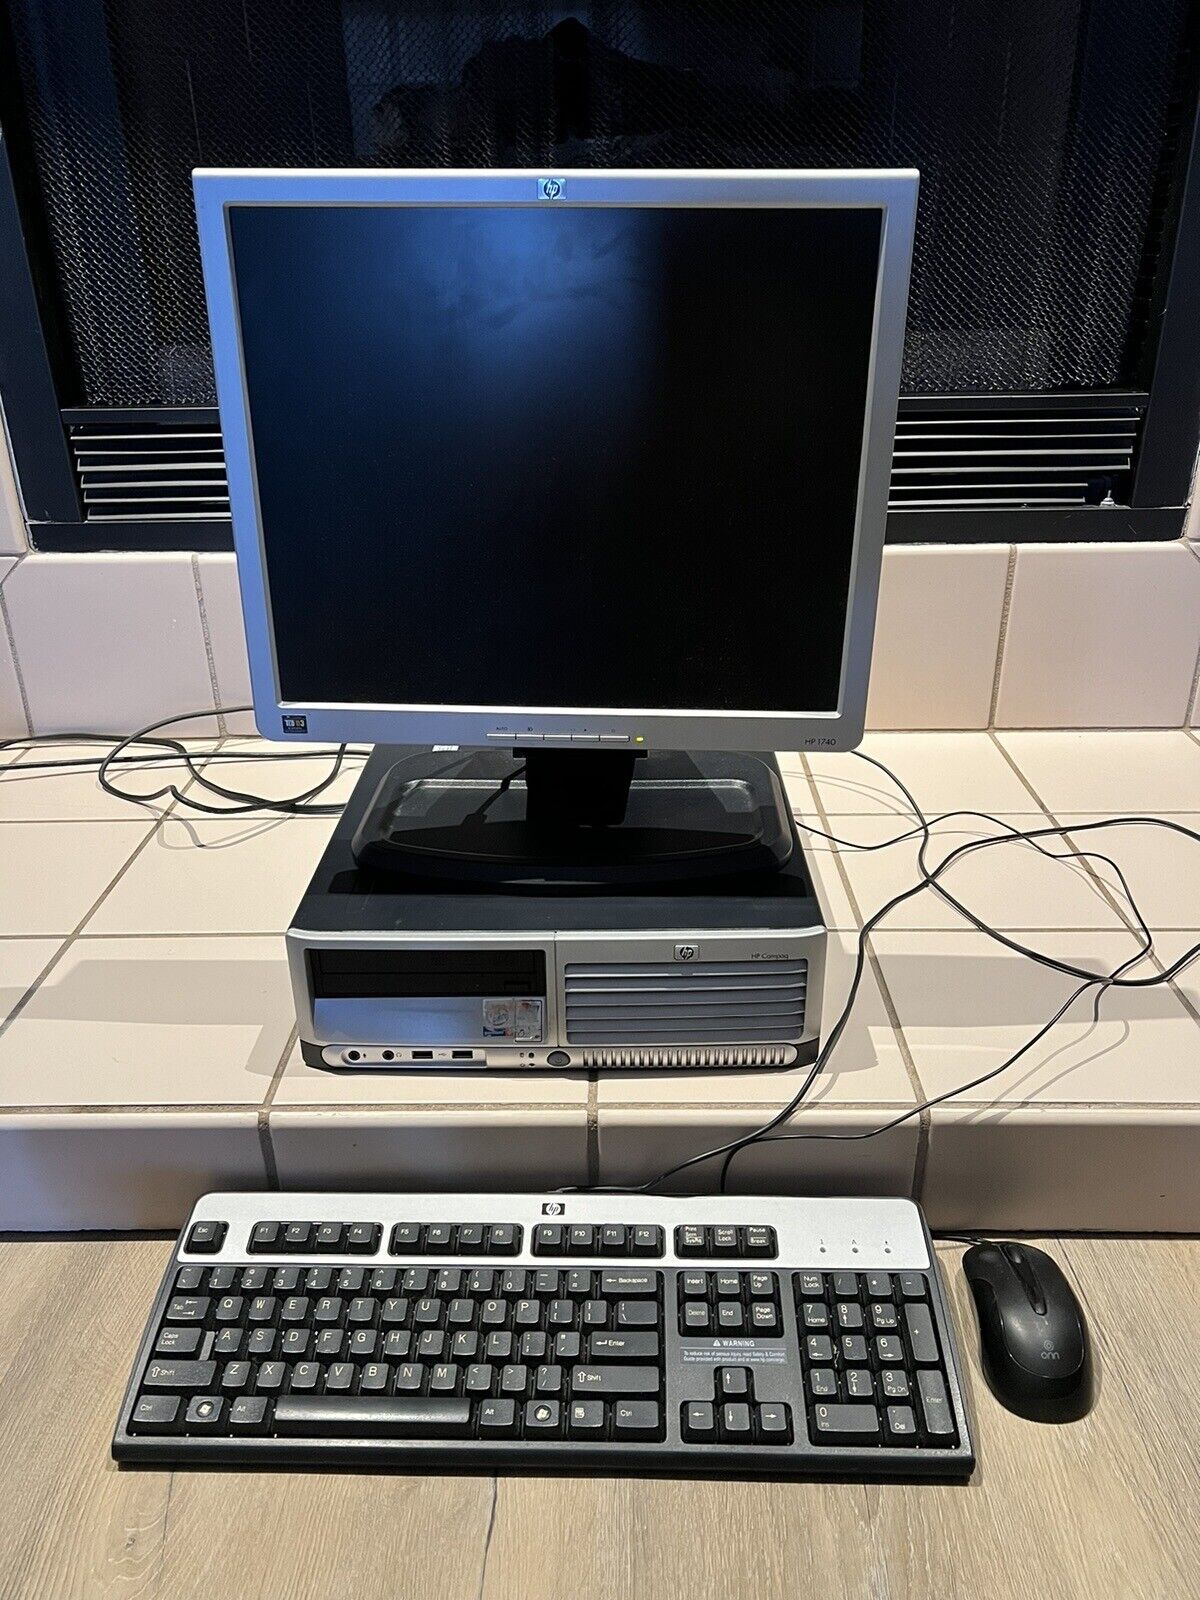 HP Compaq DC7100 SFF Desktop With HP1740 Monitor, Keyboard And Mouse (Restored)